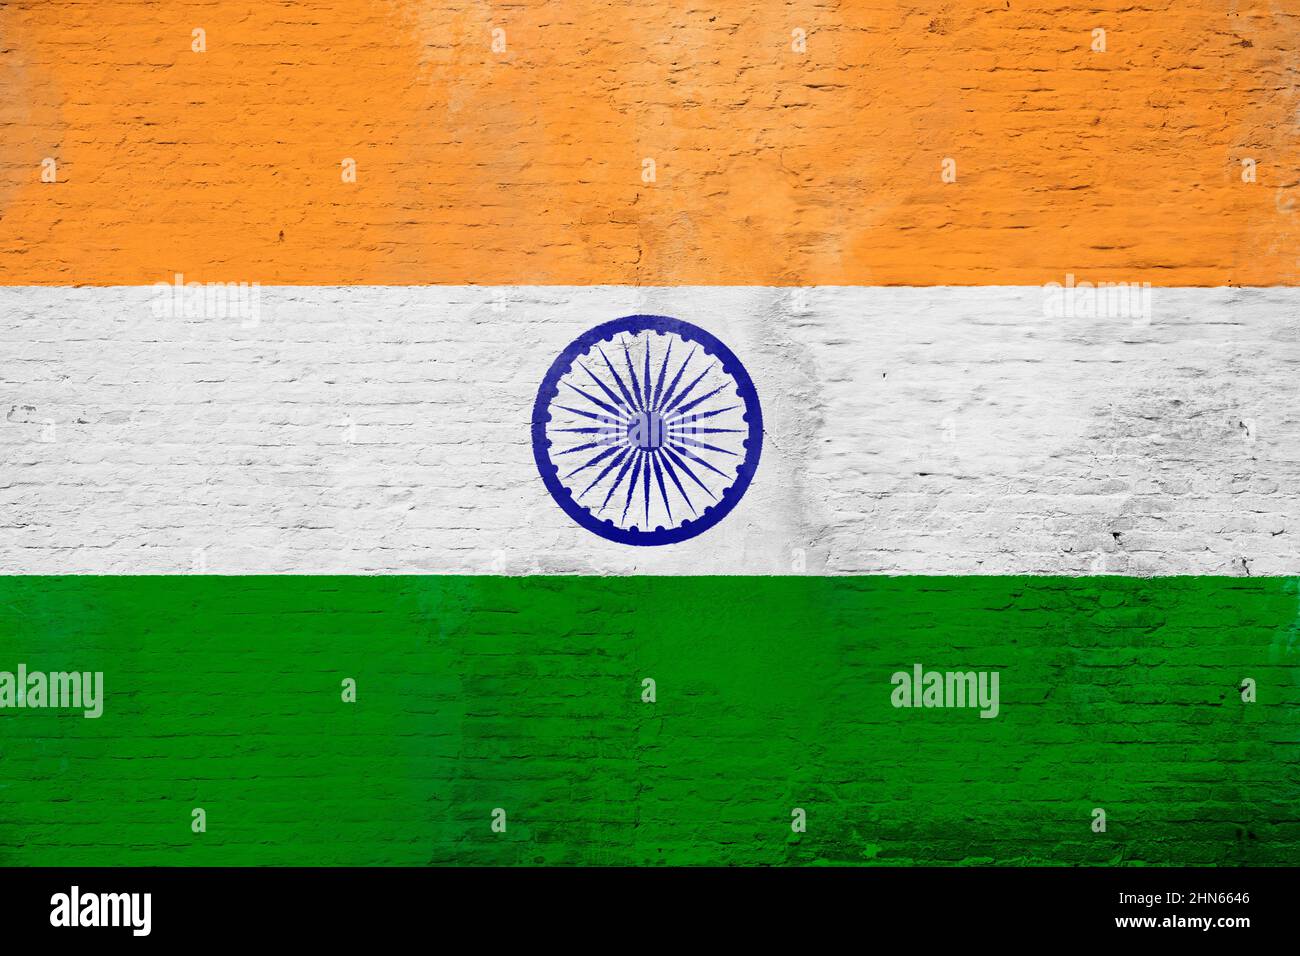 Full frame photo of a weathered flag of India painted on a plastered brick wall. Stock Photo